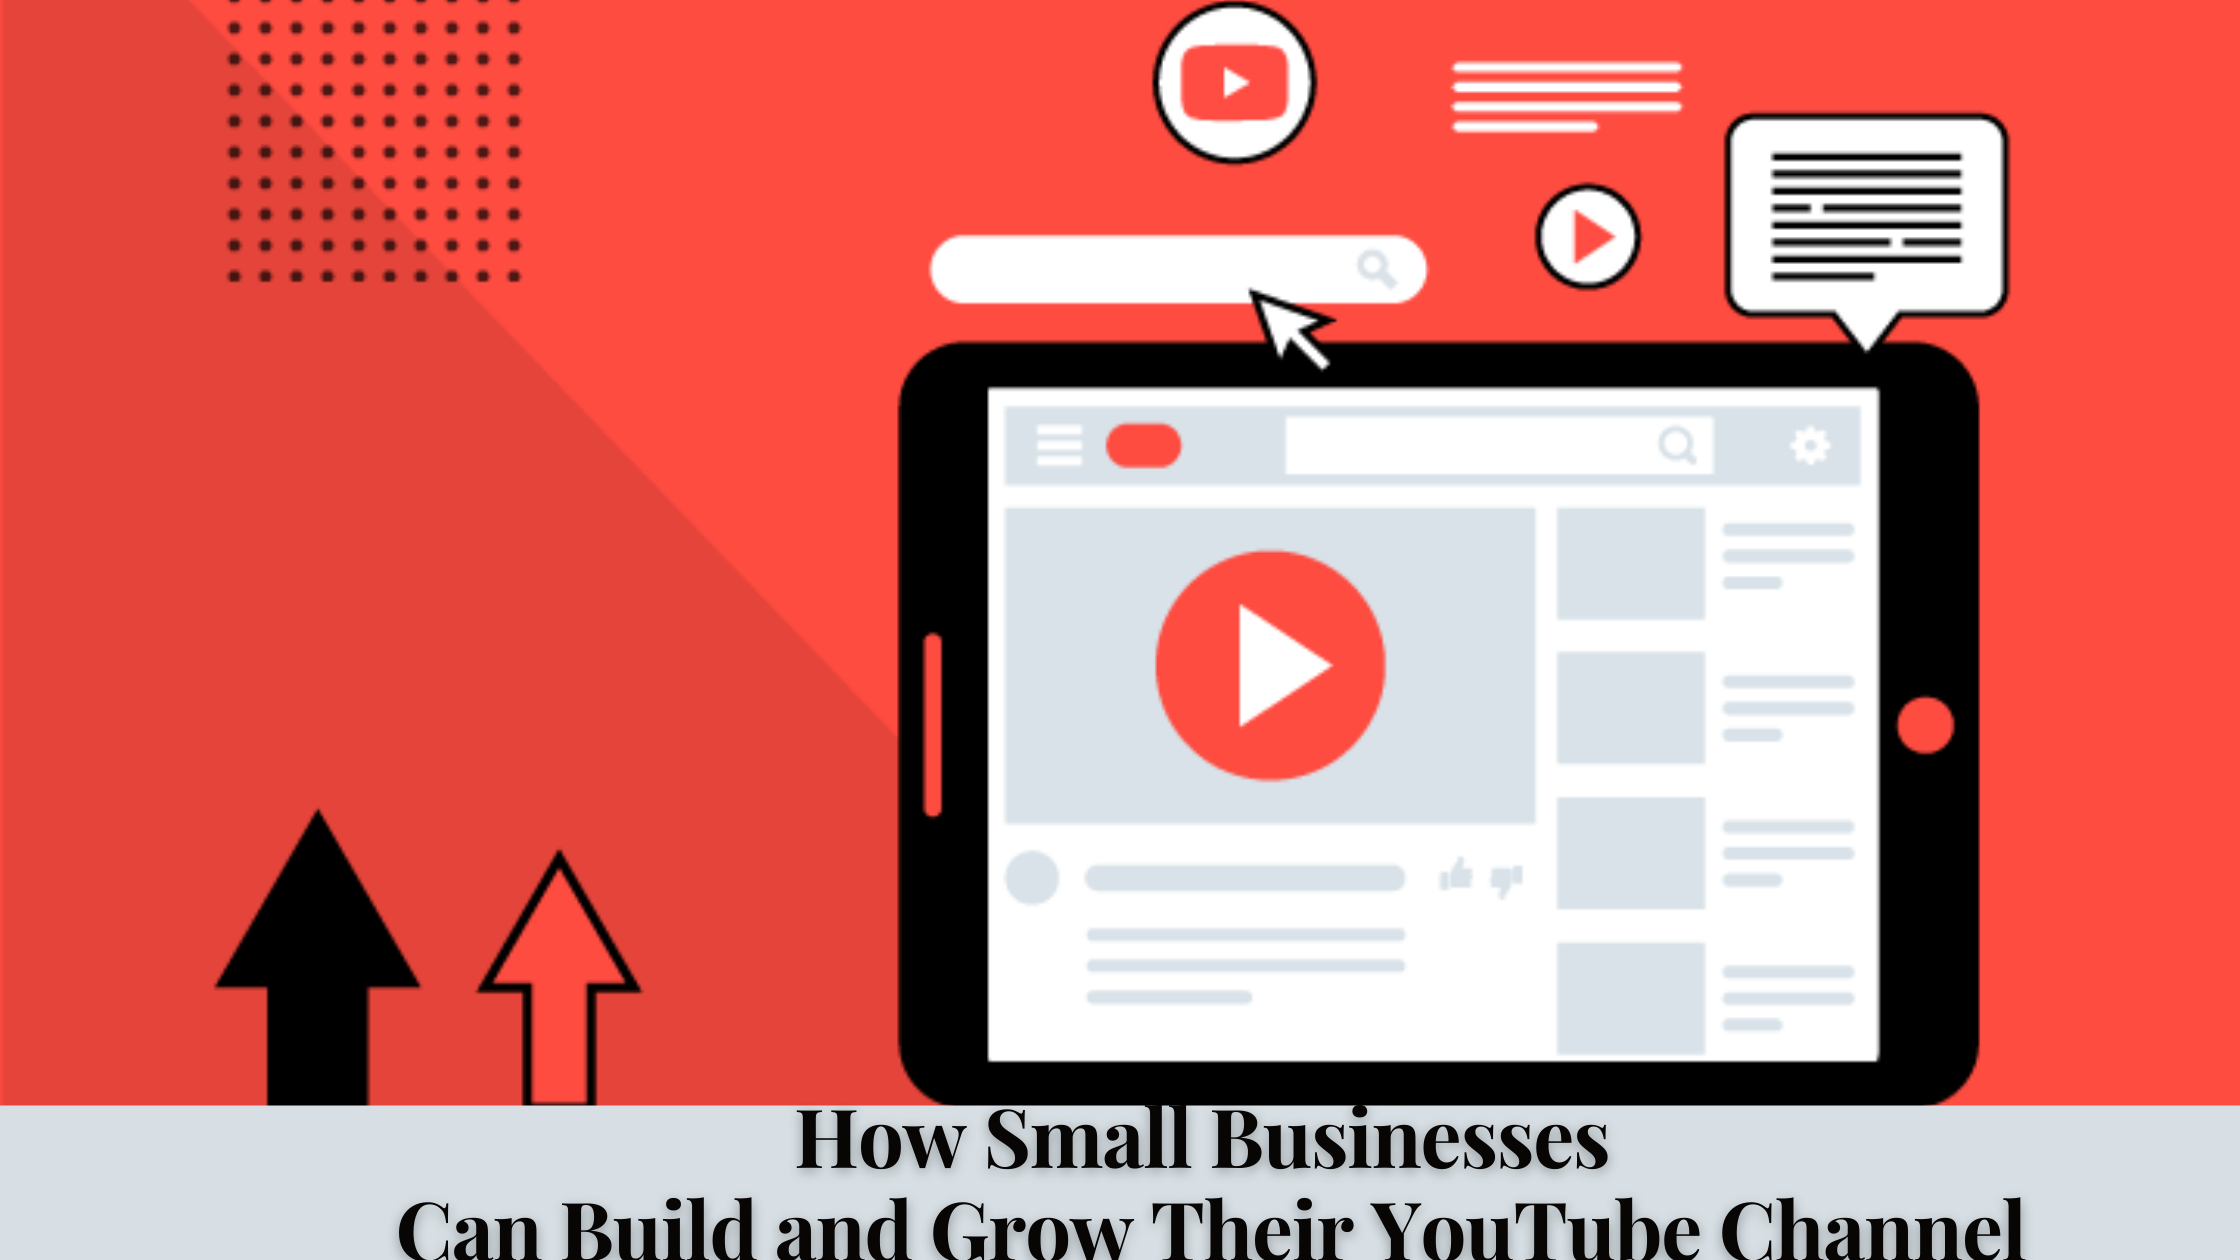 How Small Businesses Can Build and Grow Their YouTube Channel